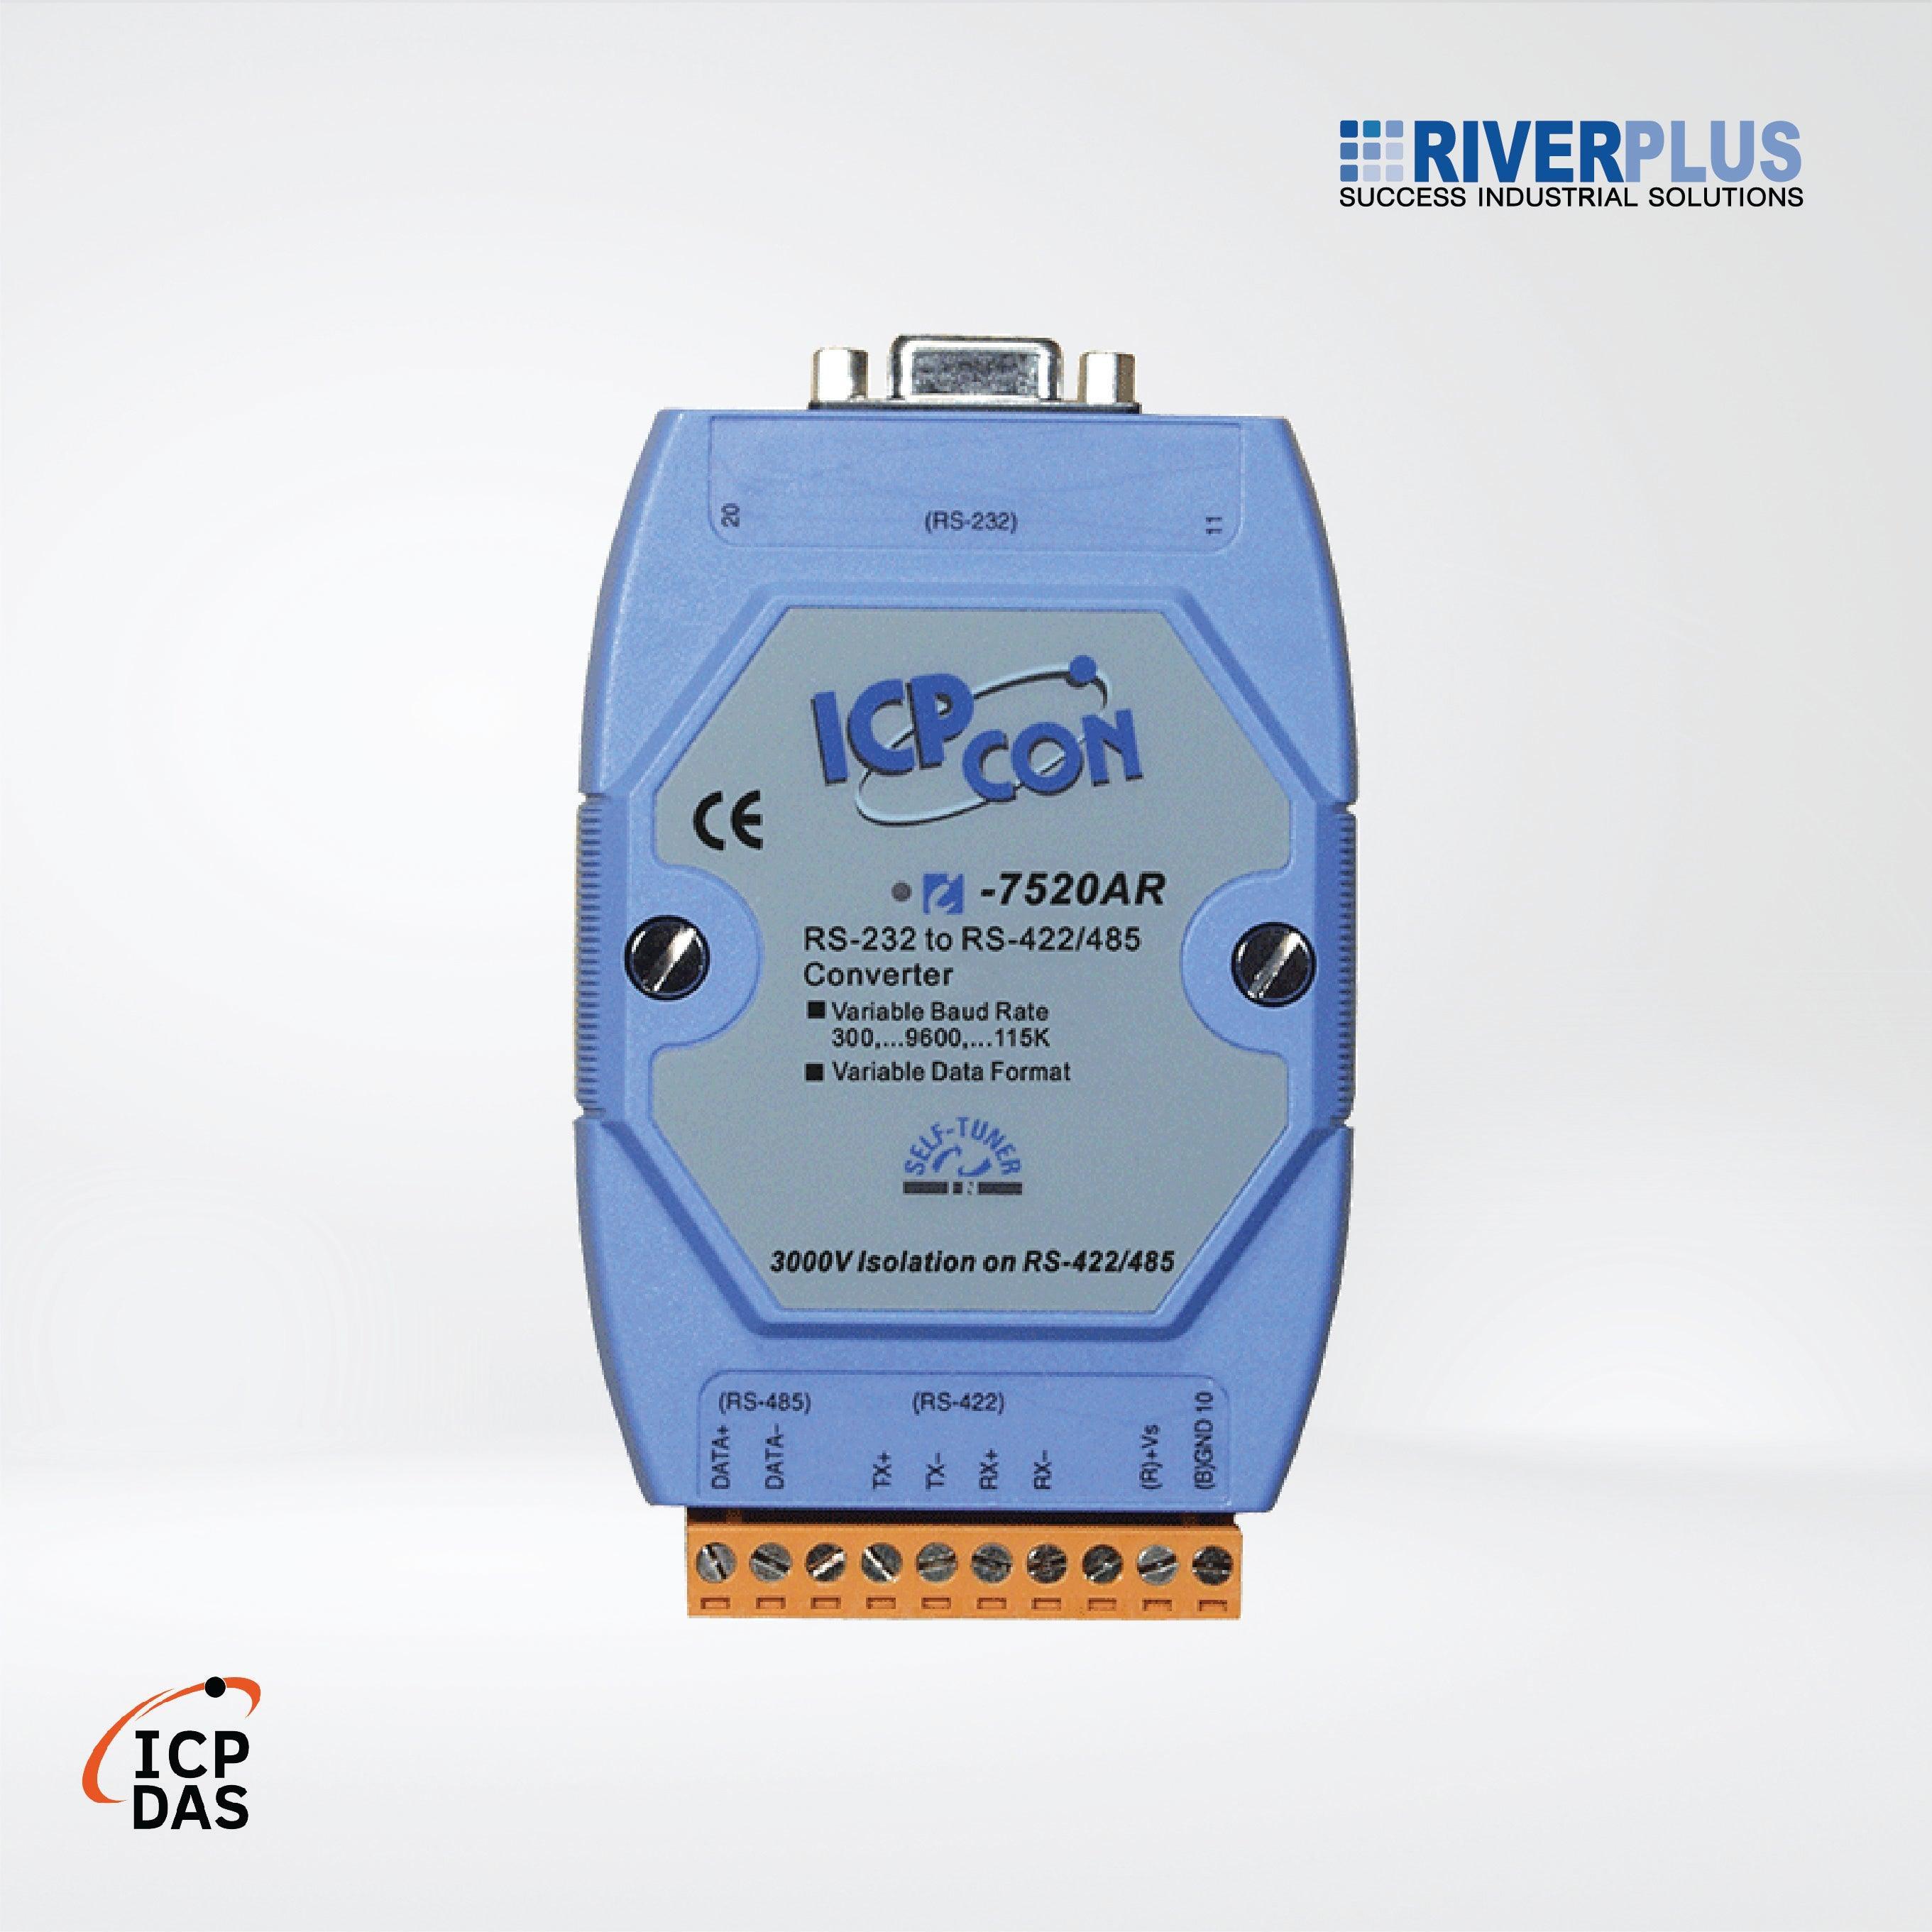 I-7520AR RS-232 to Isolated RS-422/485 Converter - Riverplus